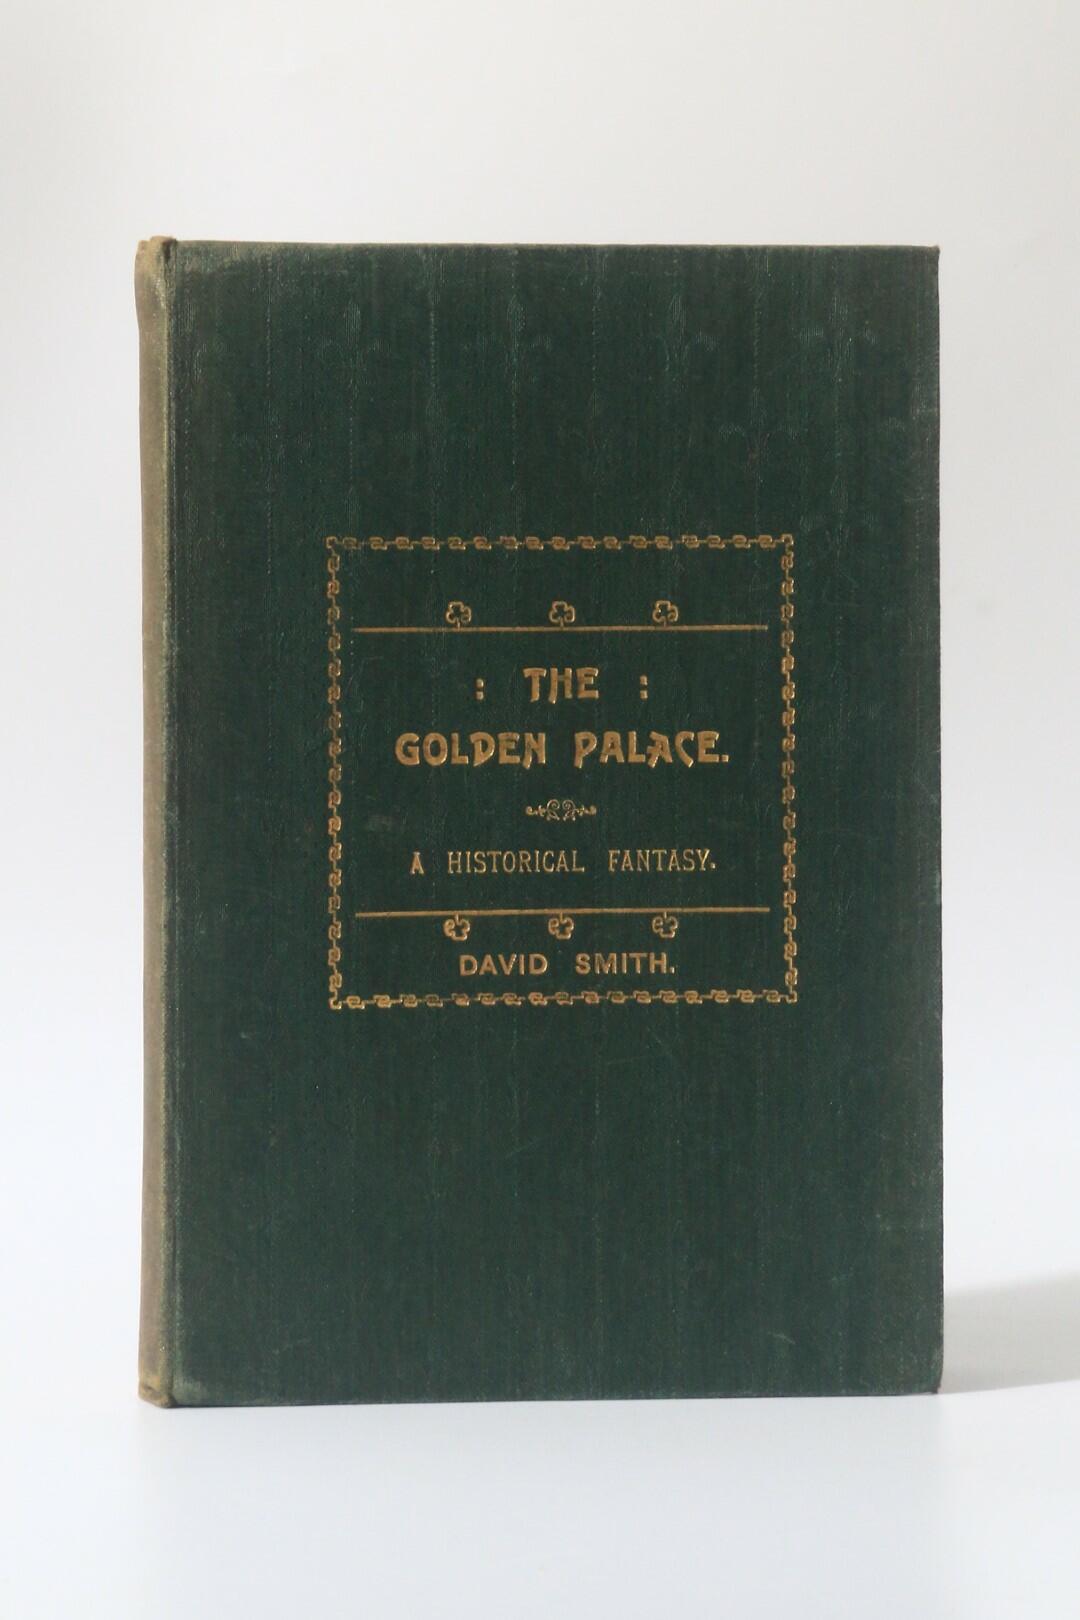 David Smith - The Golden Palace: A Historical Fantasy - Privately Printed, nd [1910], First Edition.